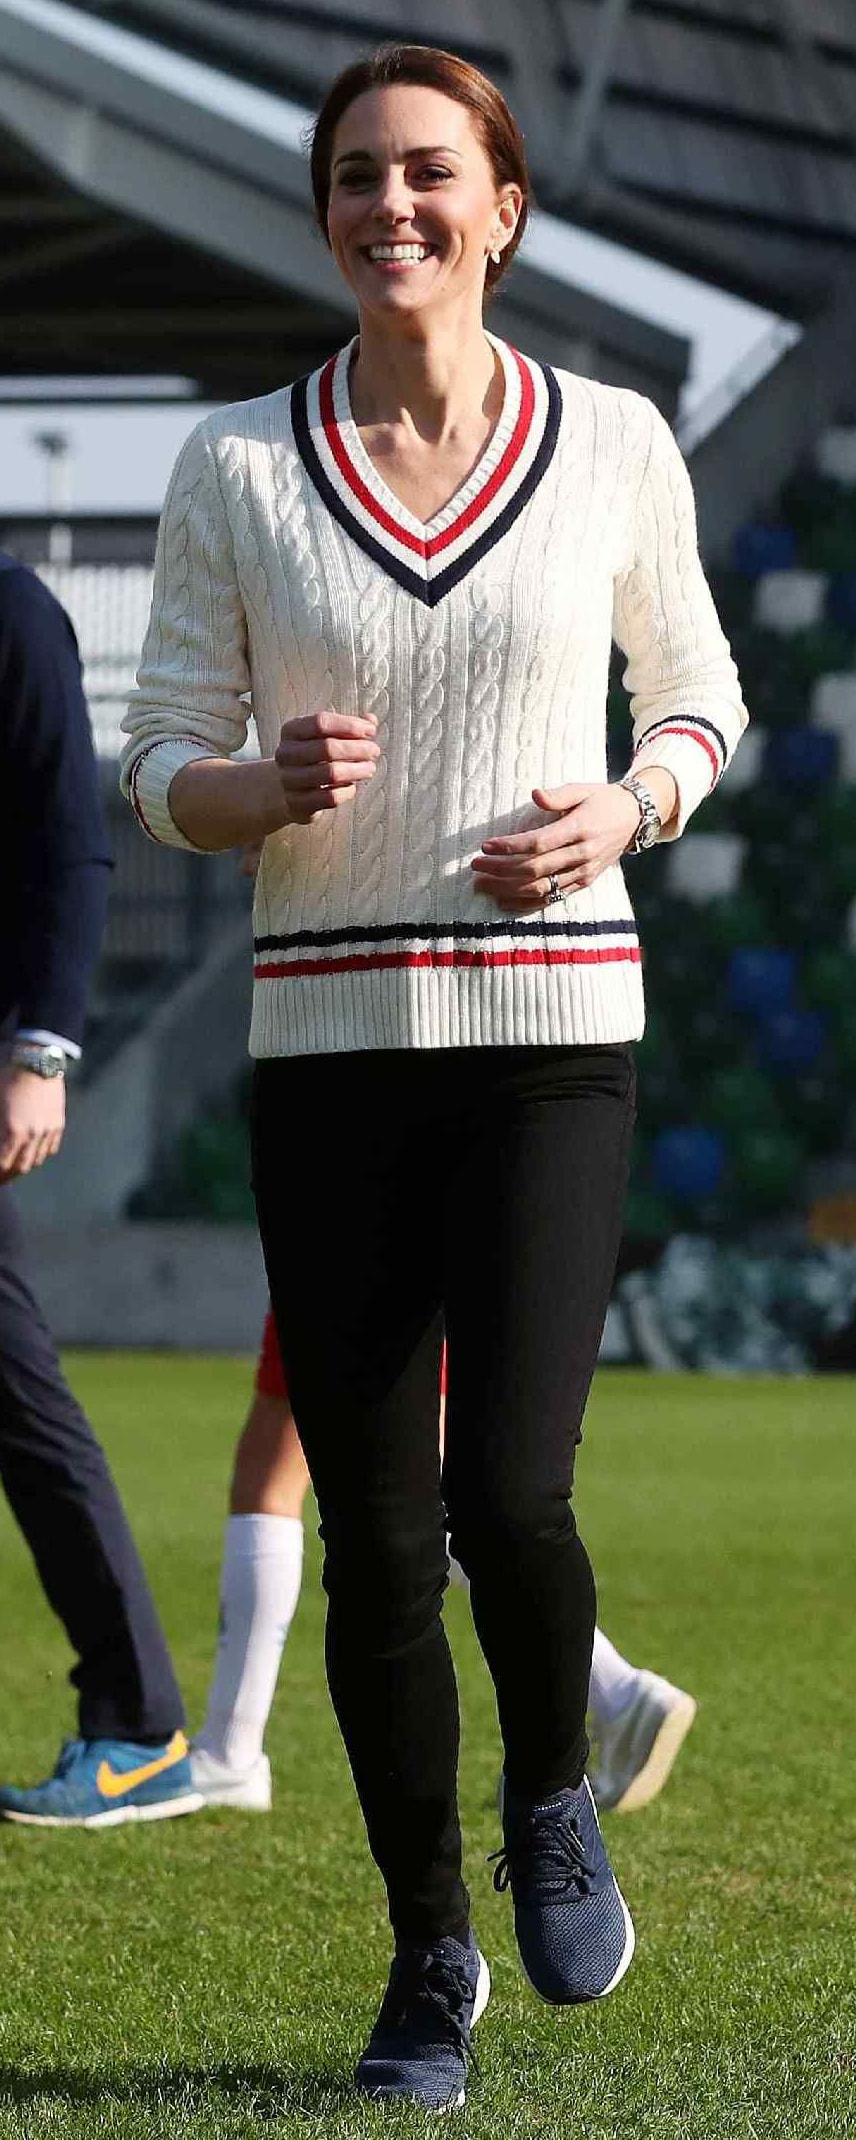 LAUREN Ralph Lauren Cable-Knit Cricket Sweater as seen on Kate Middleton, The Duchess of Cambridge.